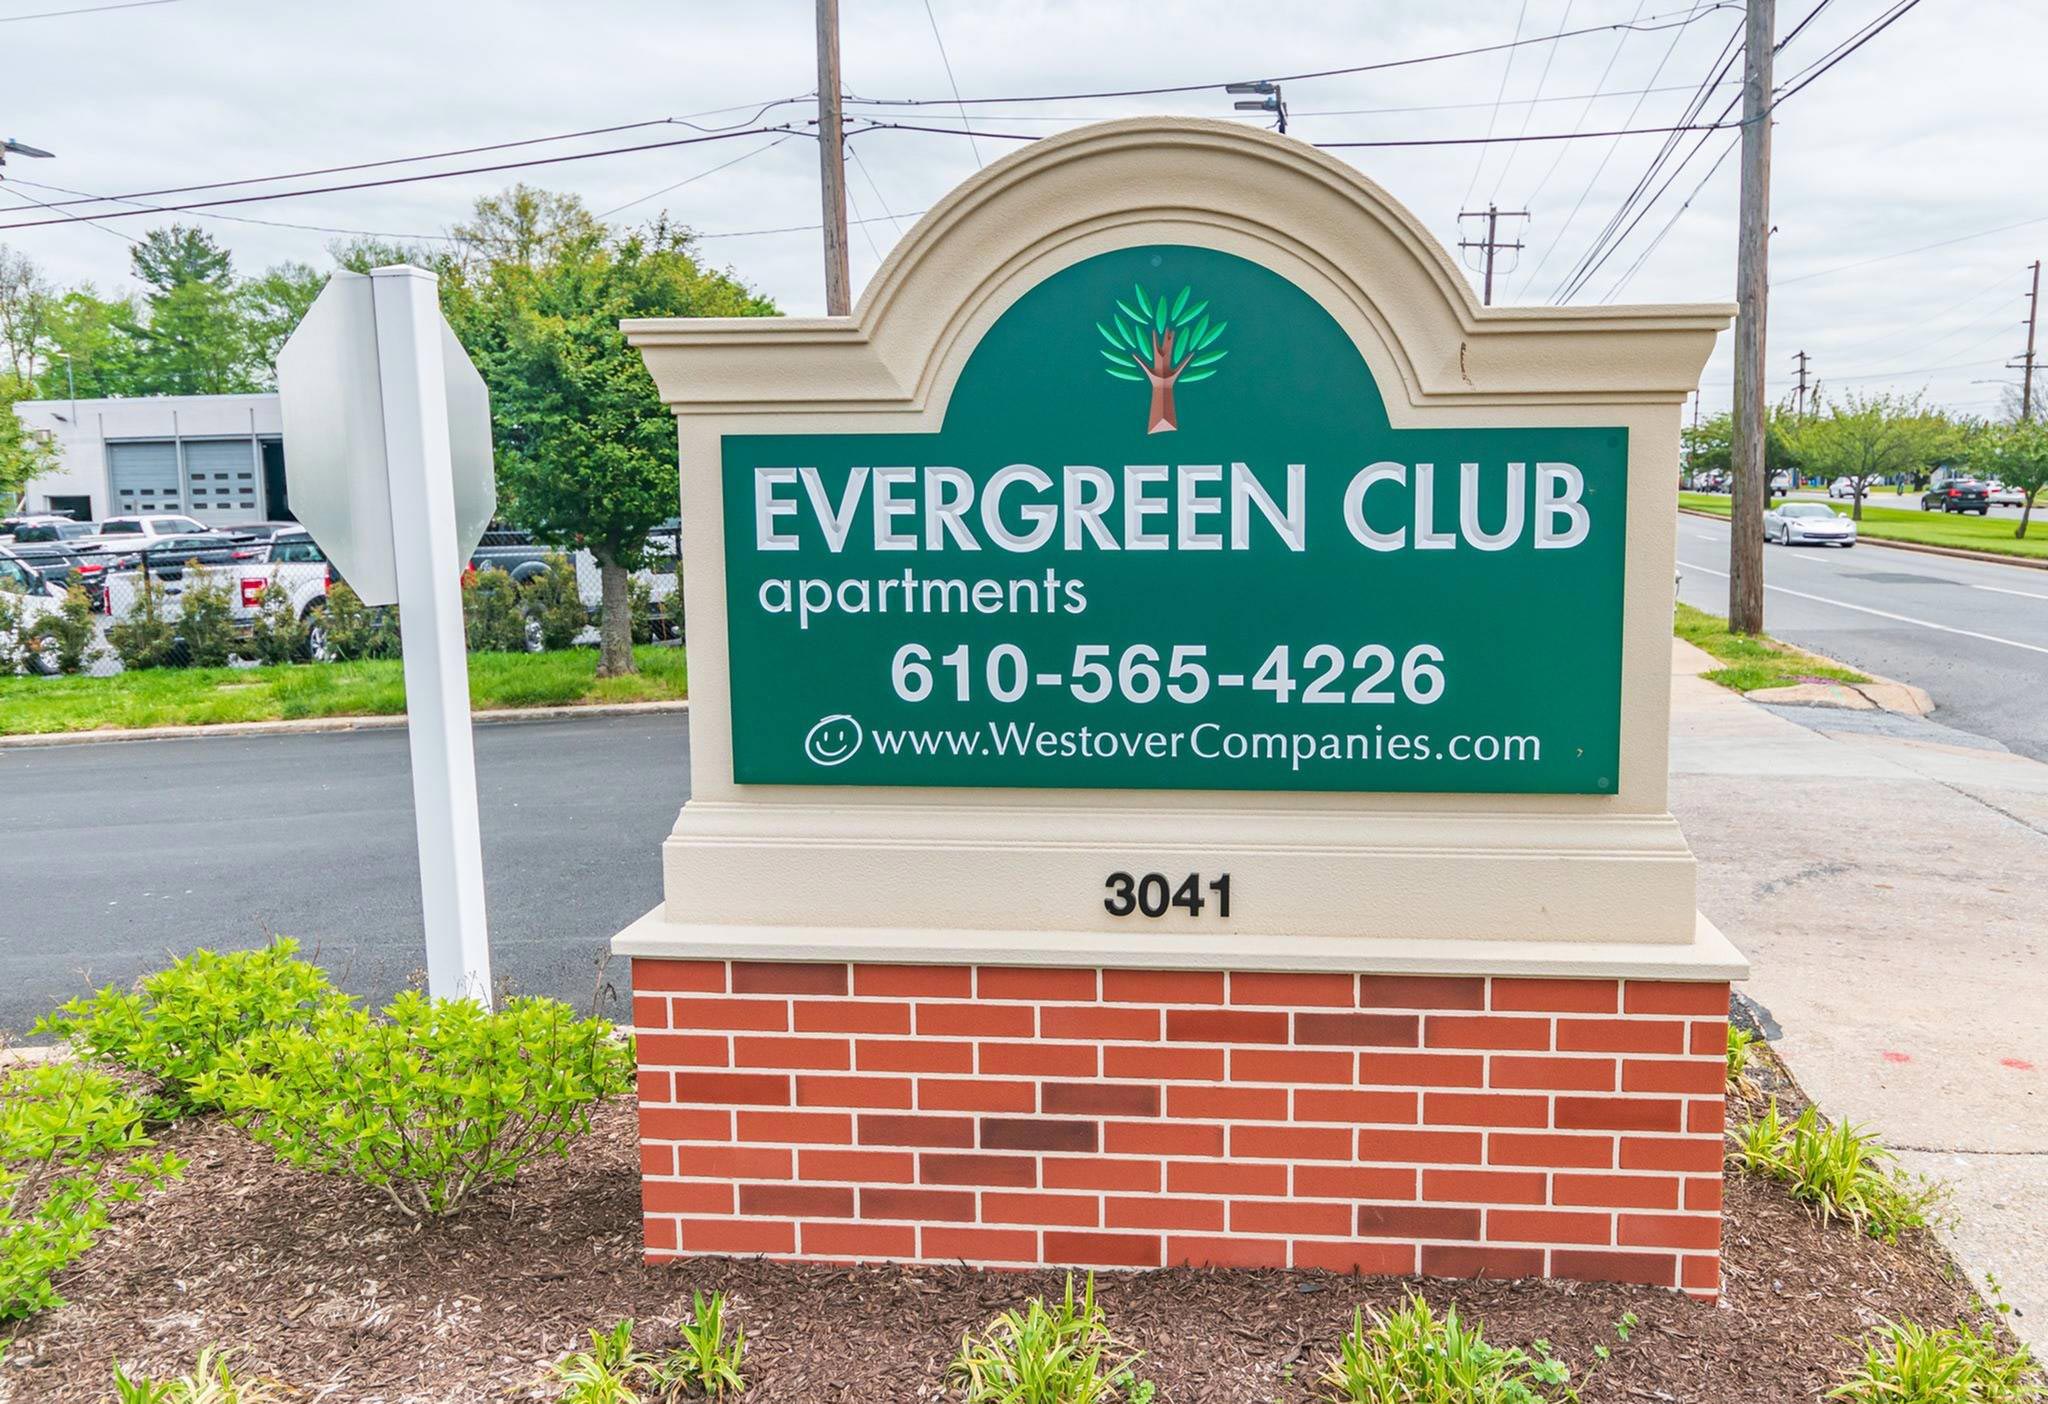 Evergreen Club Apartments entrance sign